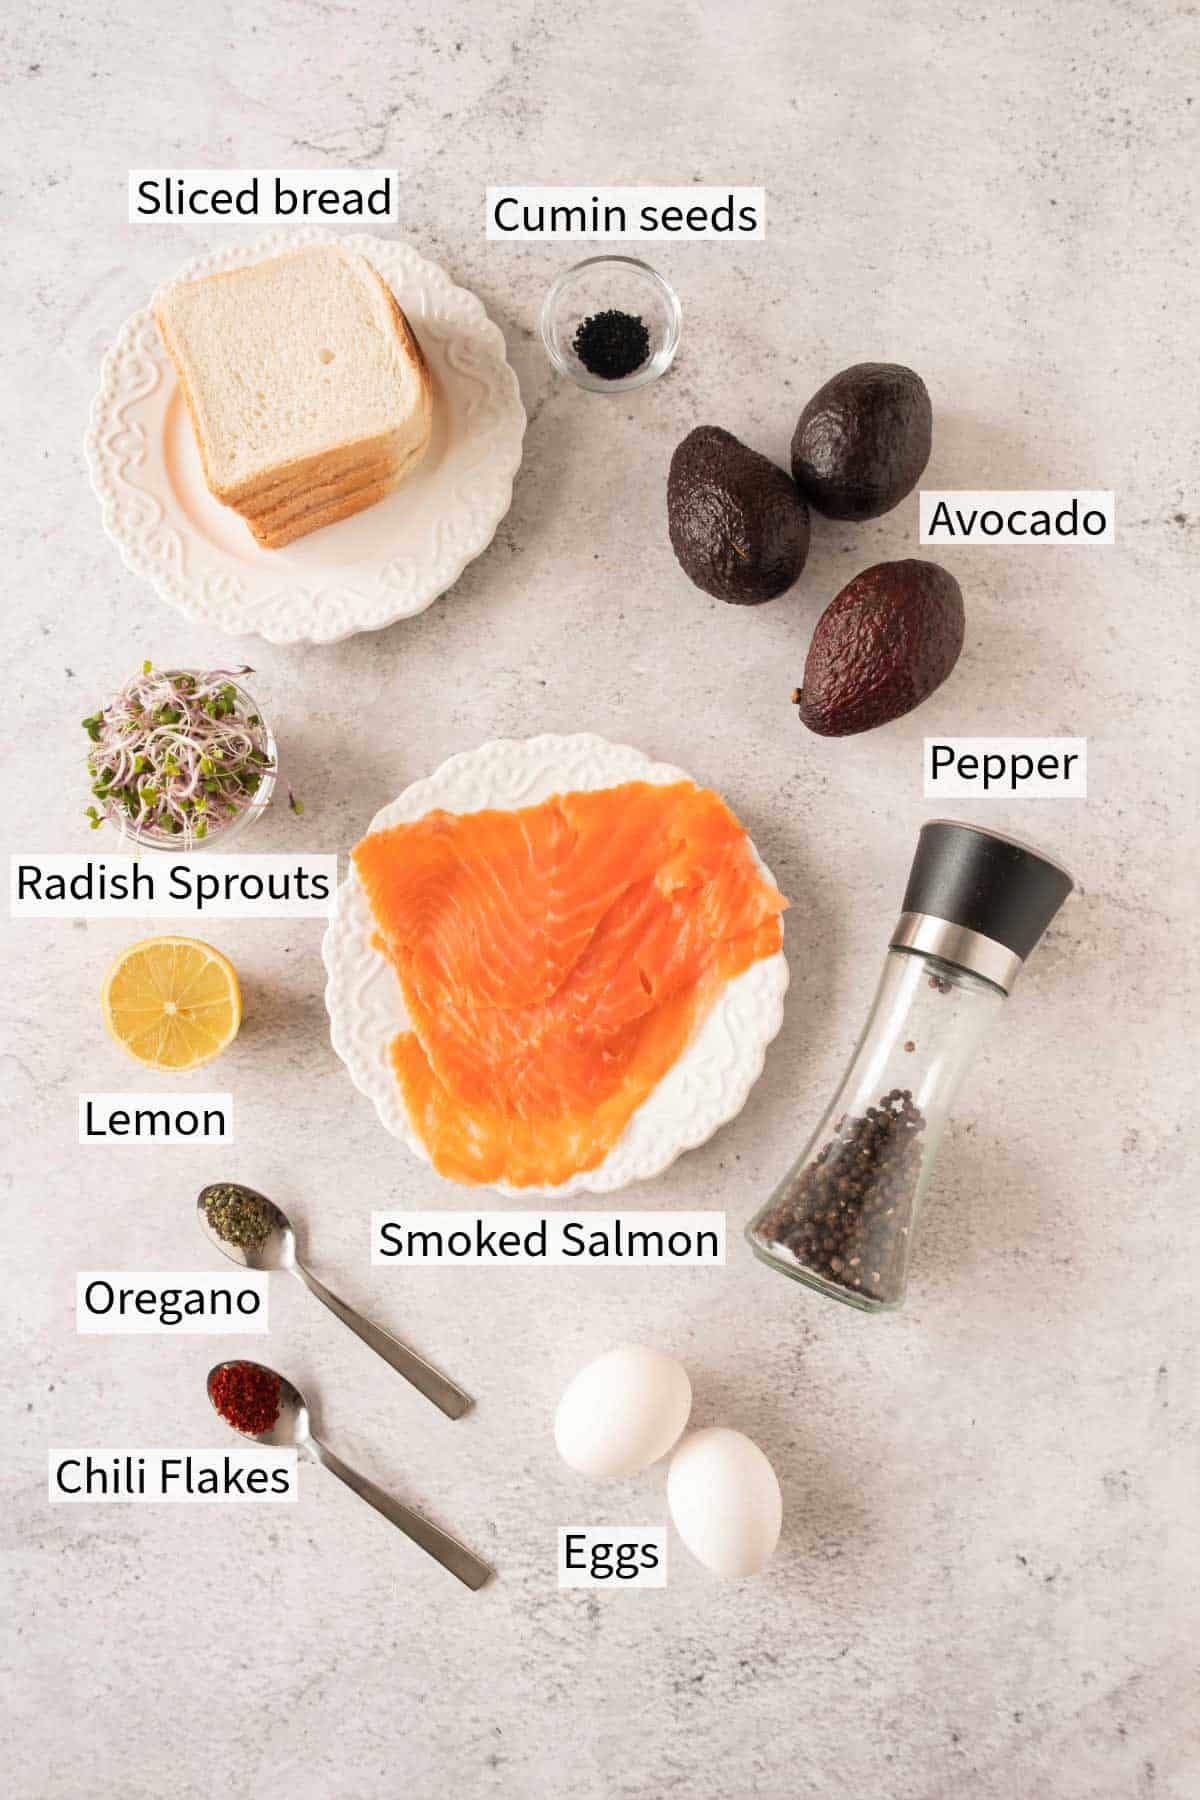 The ingredients for a salmon and avocado sandwich are shown.